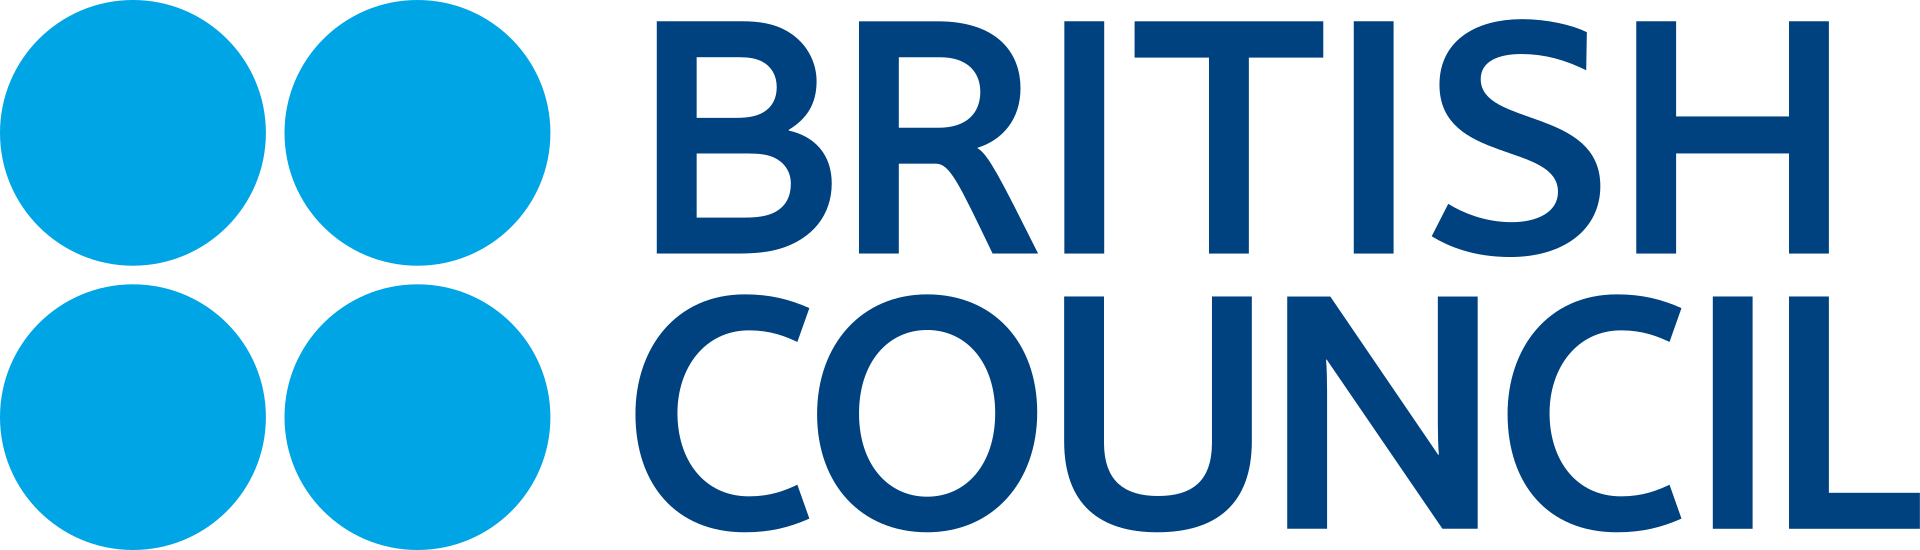 British Council - ACTED